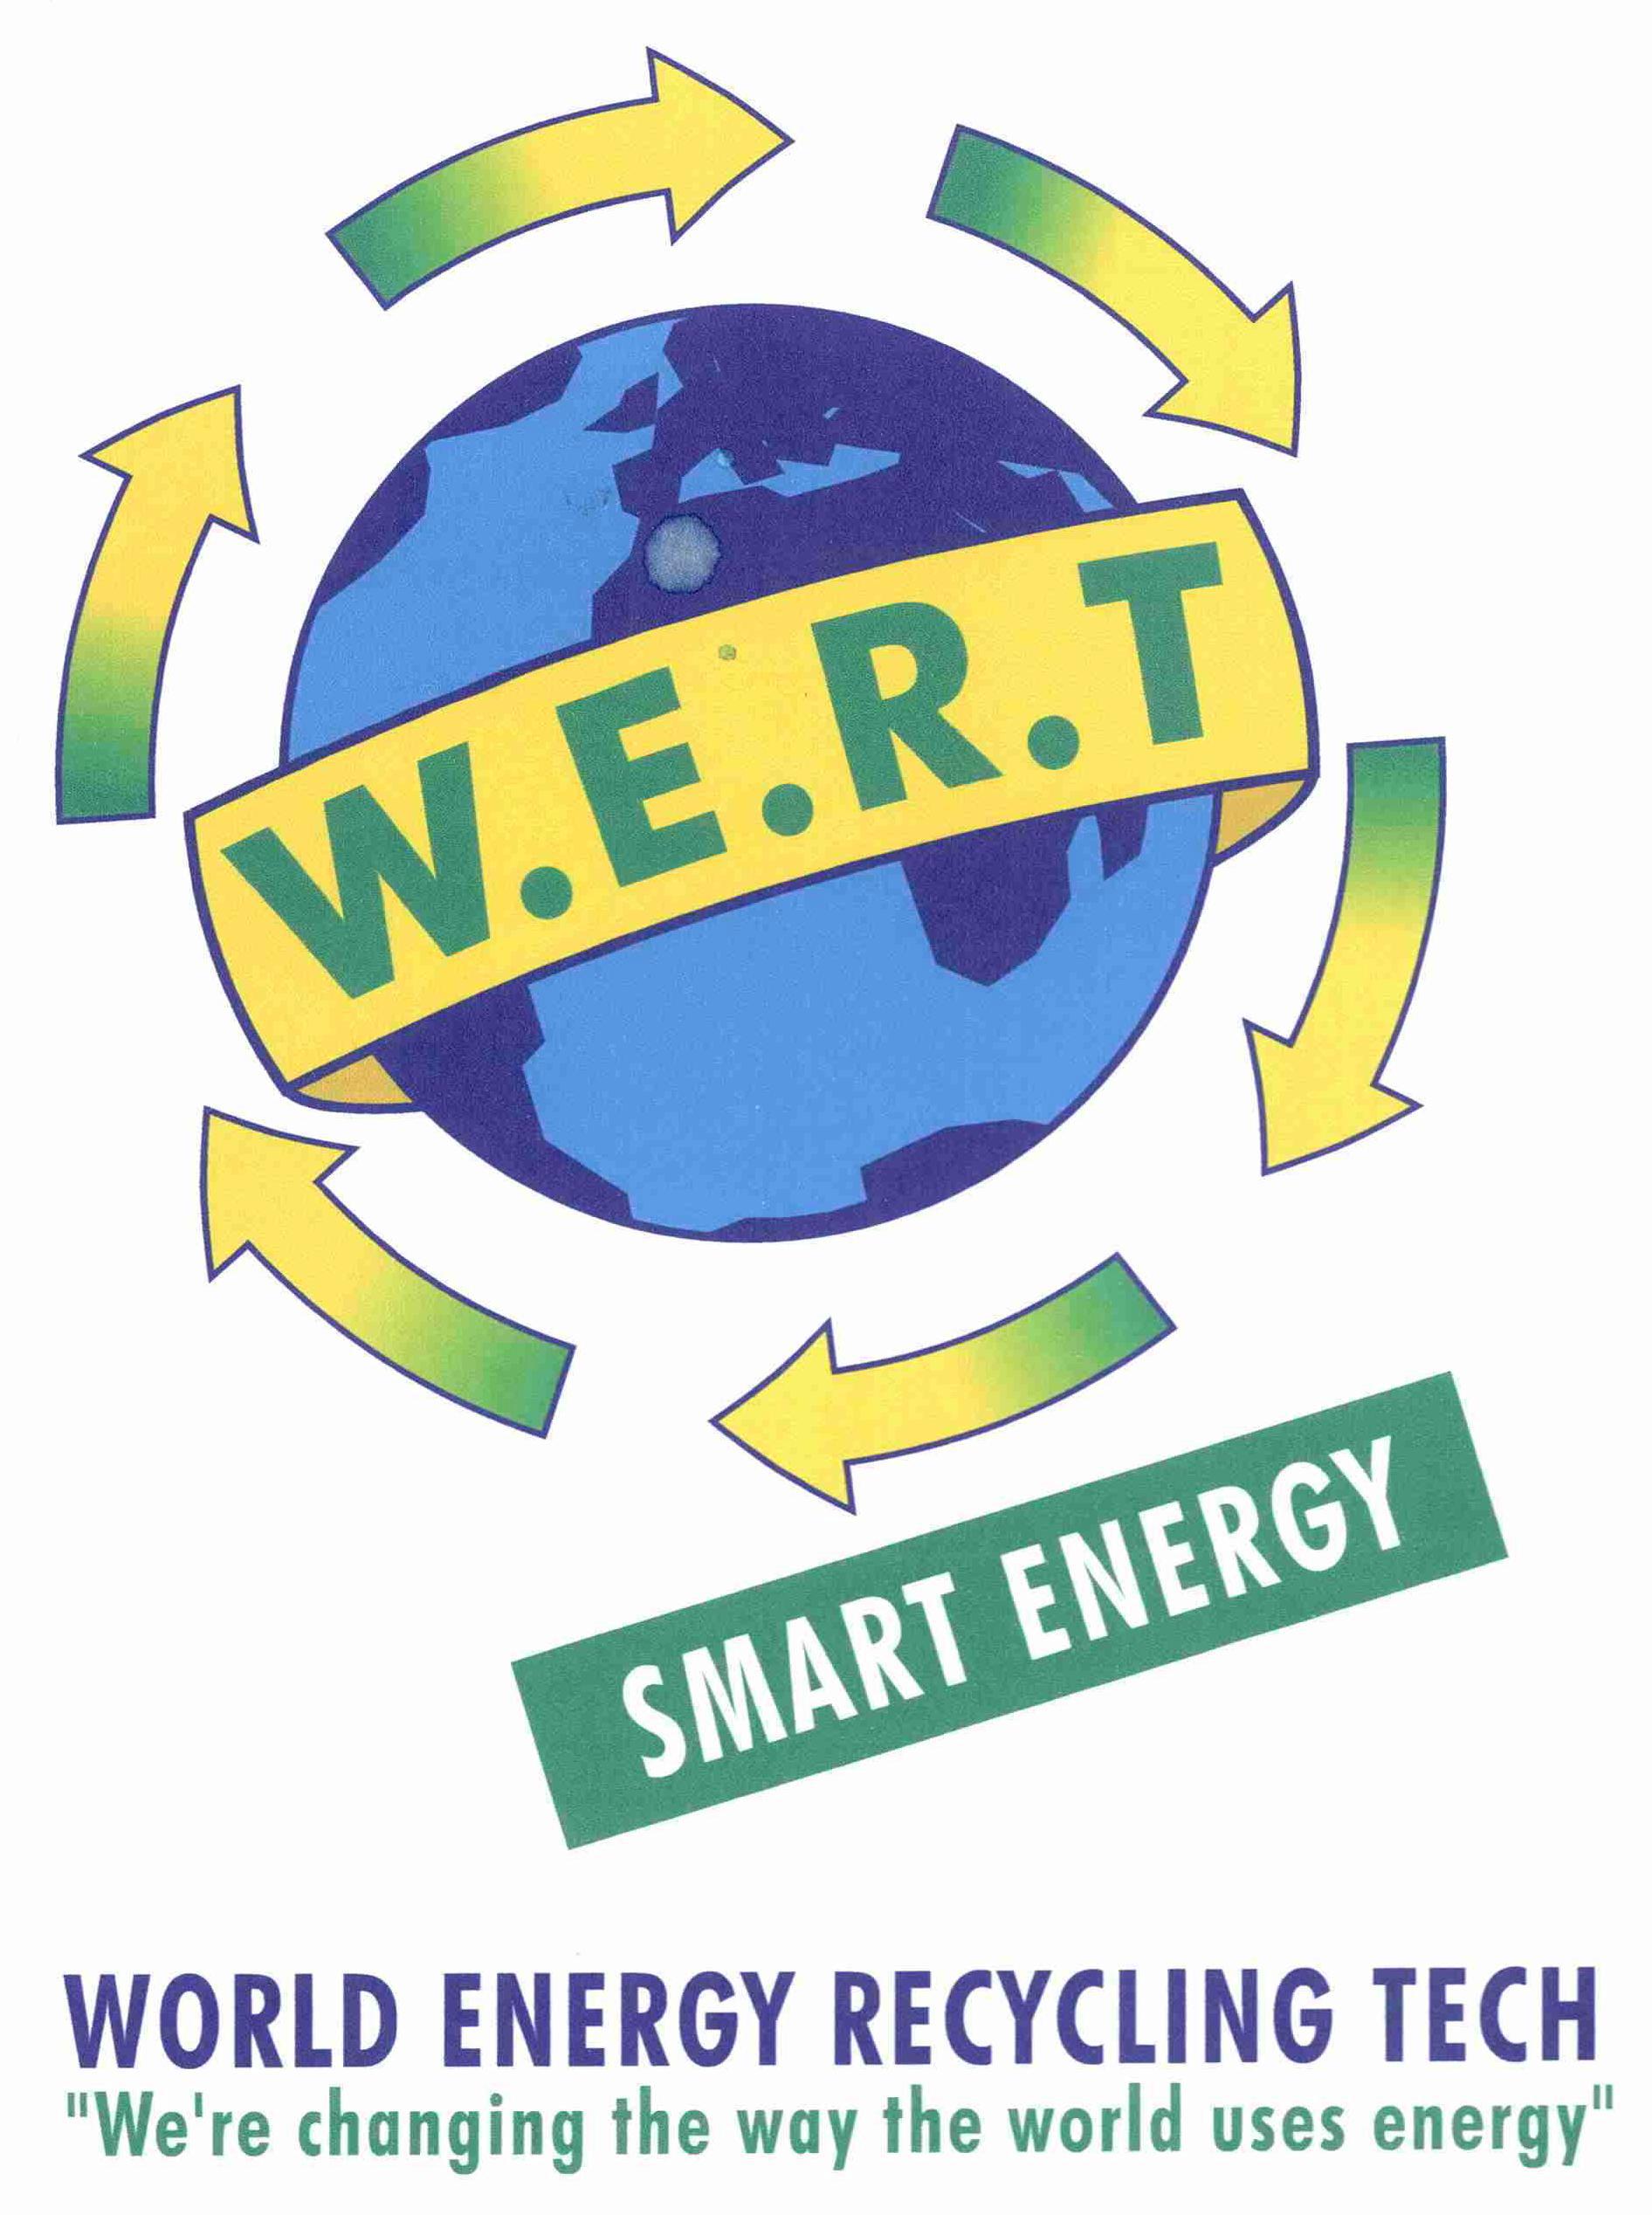  W.E.R.T SMART ENERGY WORLD ENERGY RECYCLING TECH "WE'RE CHANGING THE WAY THEWORLD USES ENERGY"